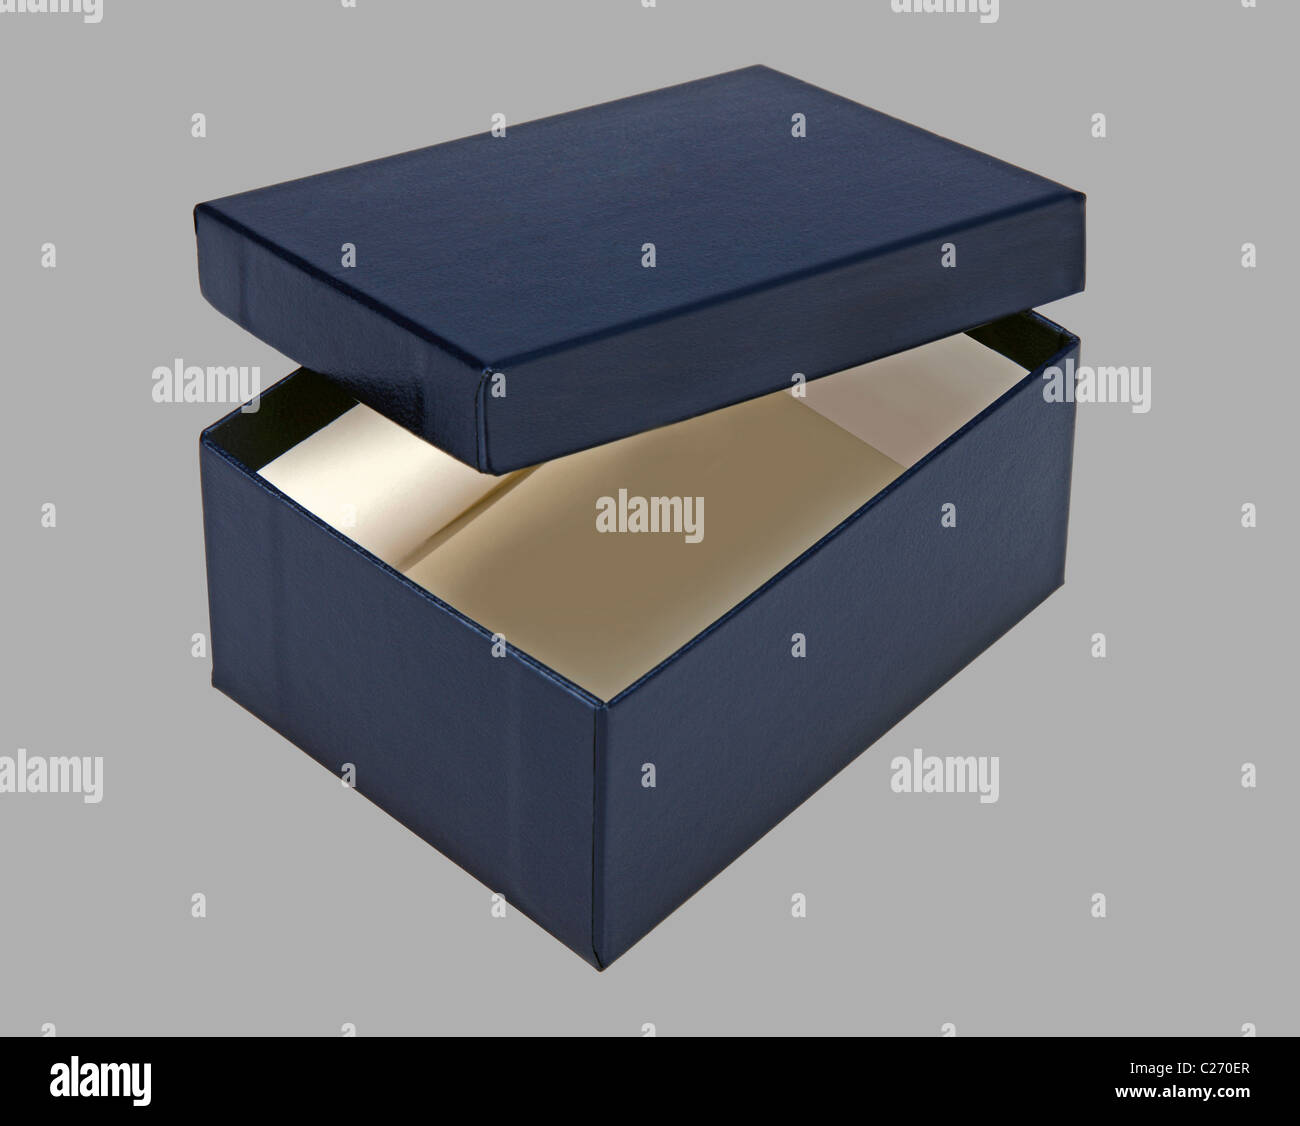 Small blue box, open with a lid, for design layout Stock Photo